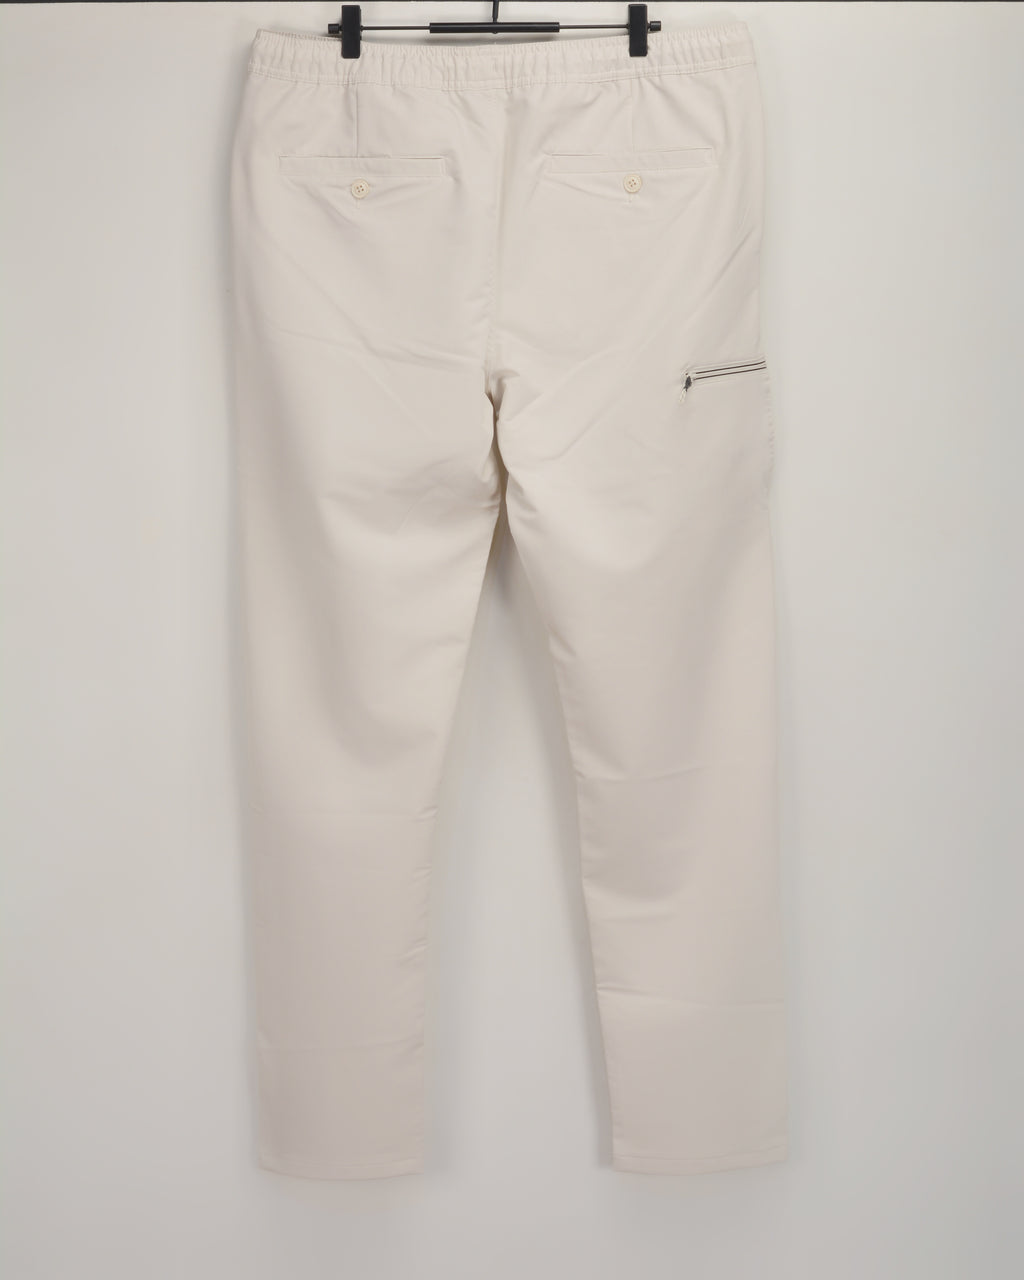 PacificBlue  Sweatpant Jogger Pants Off-White with pocket zipper